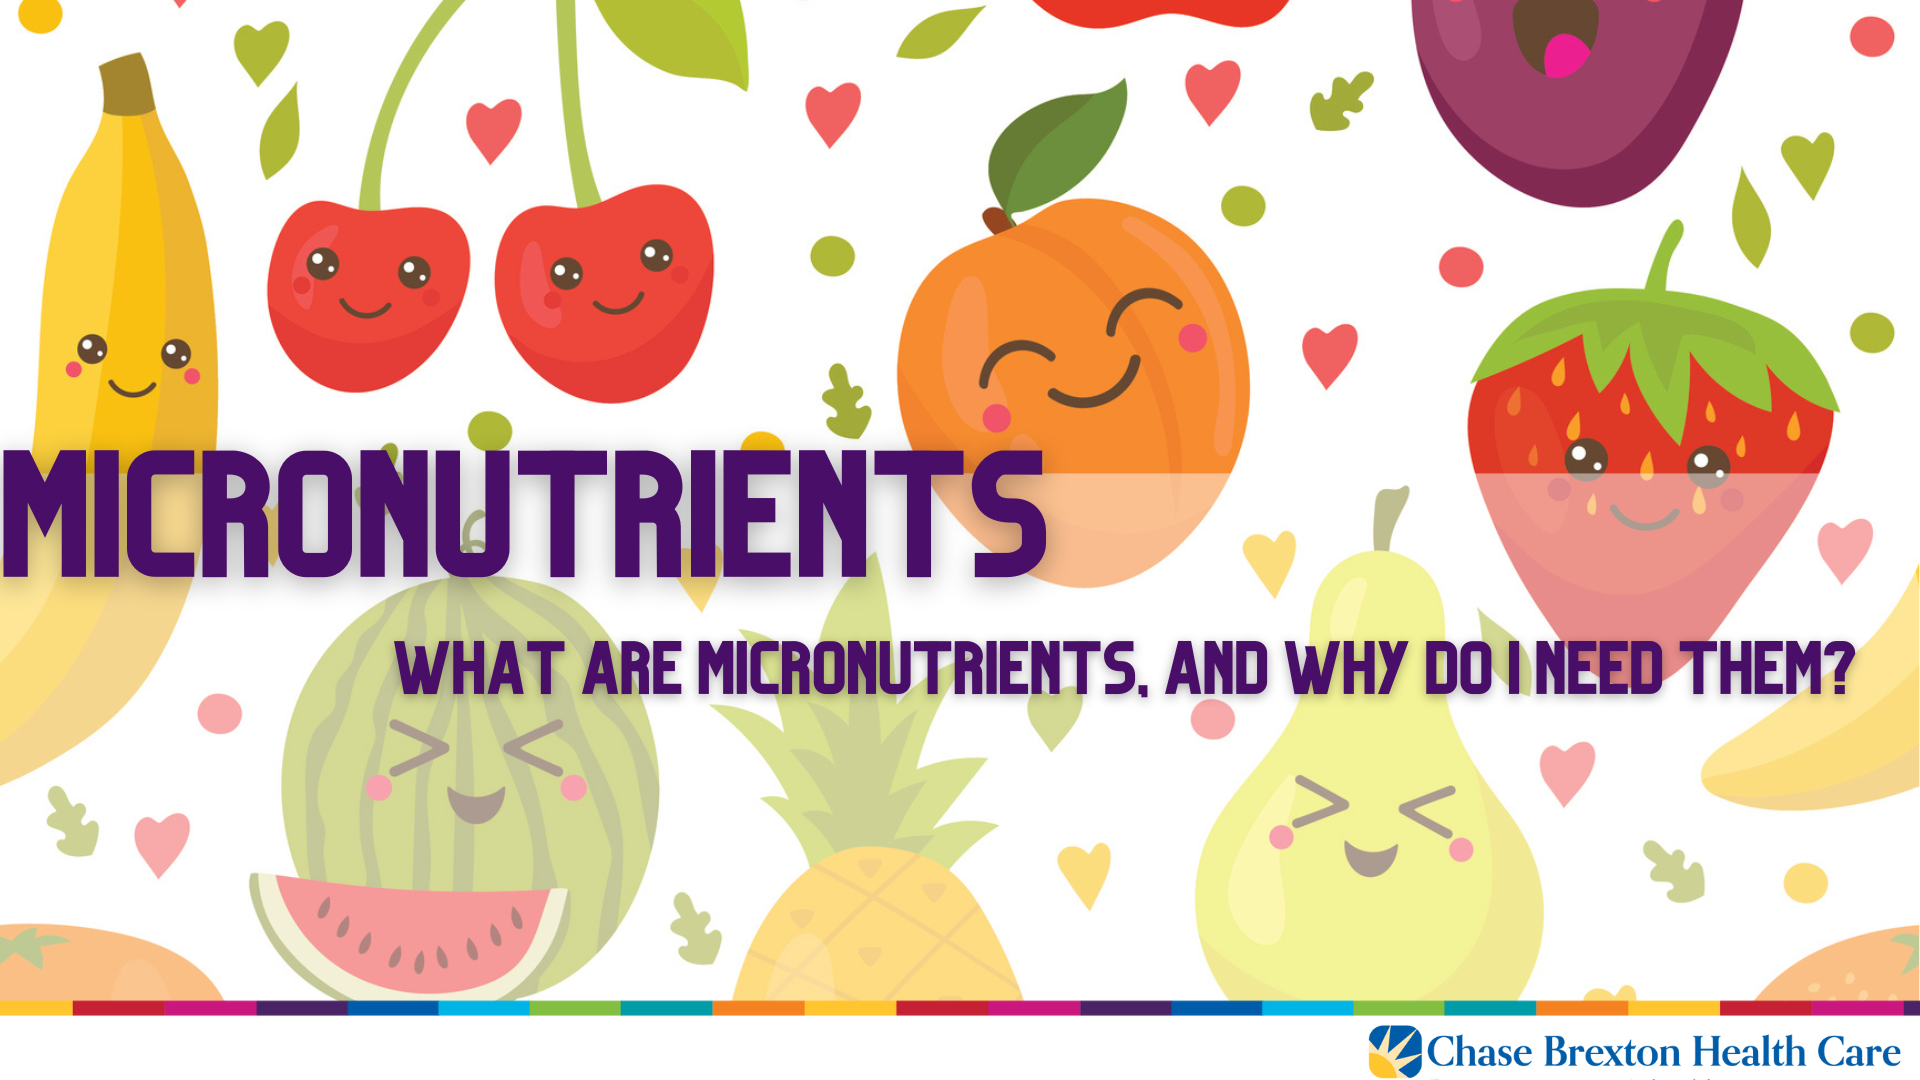 Micronutrients with graphics of fruit